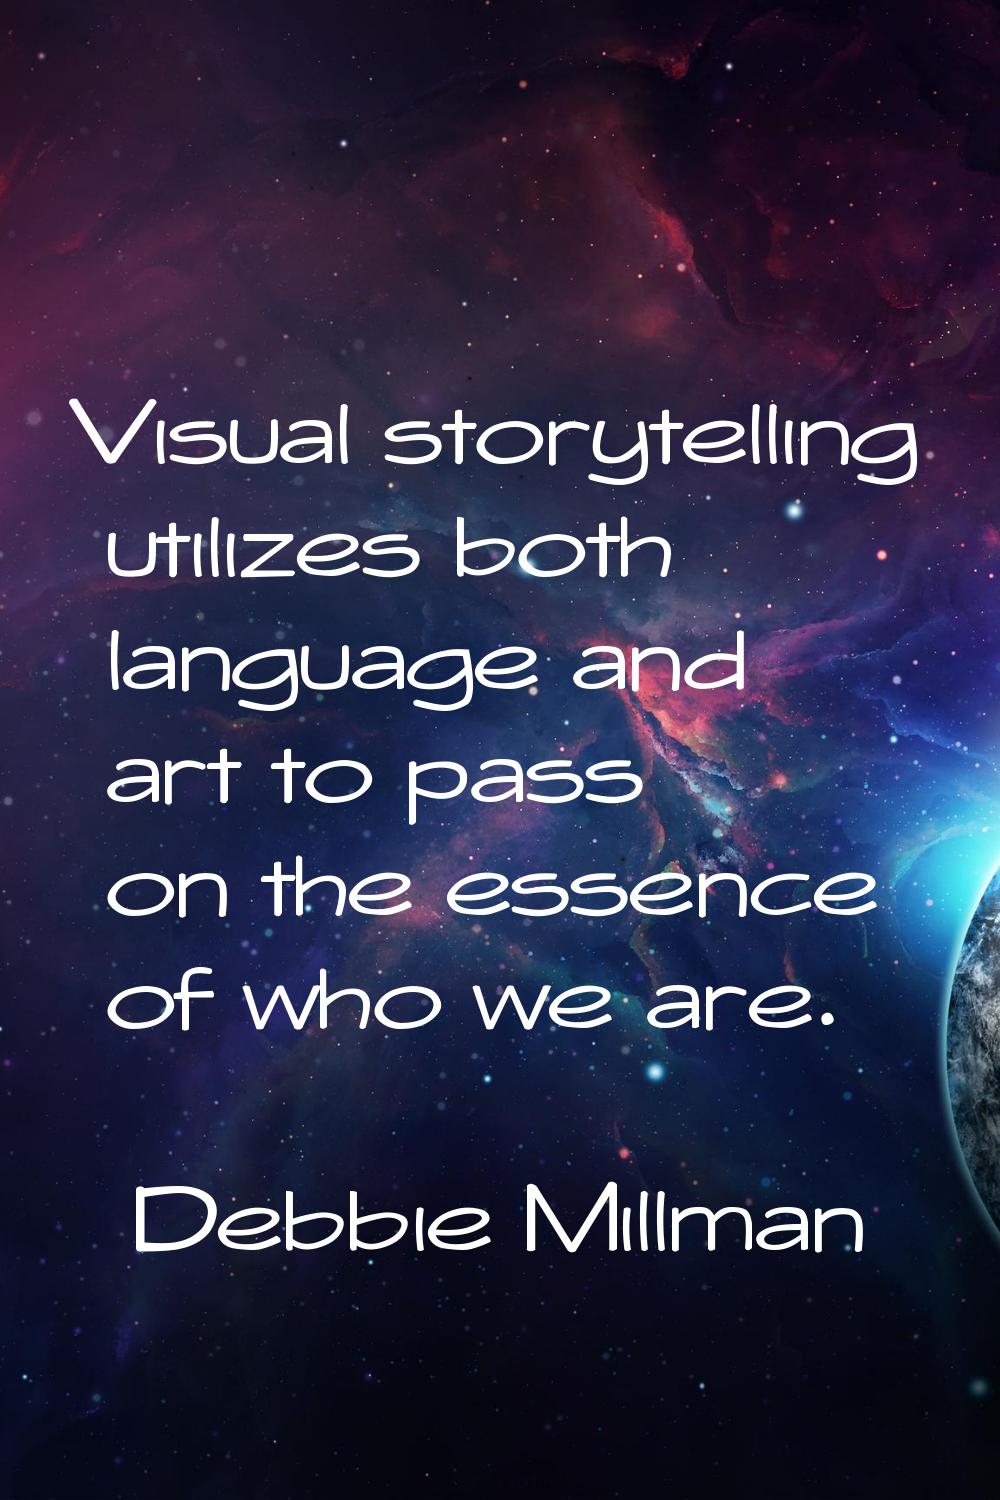 Visual storytelling utilizes both language and art to pass on the essence of who we are.